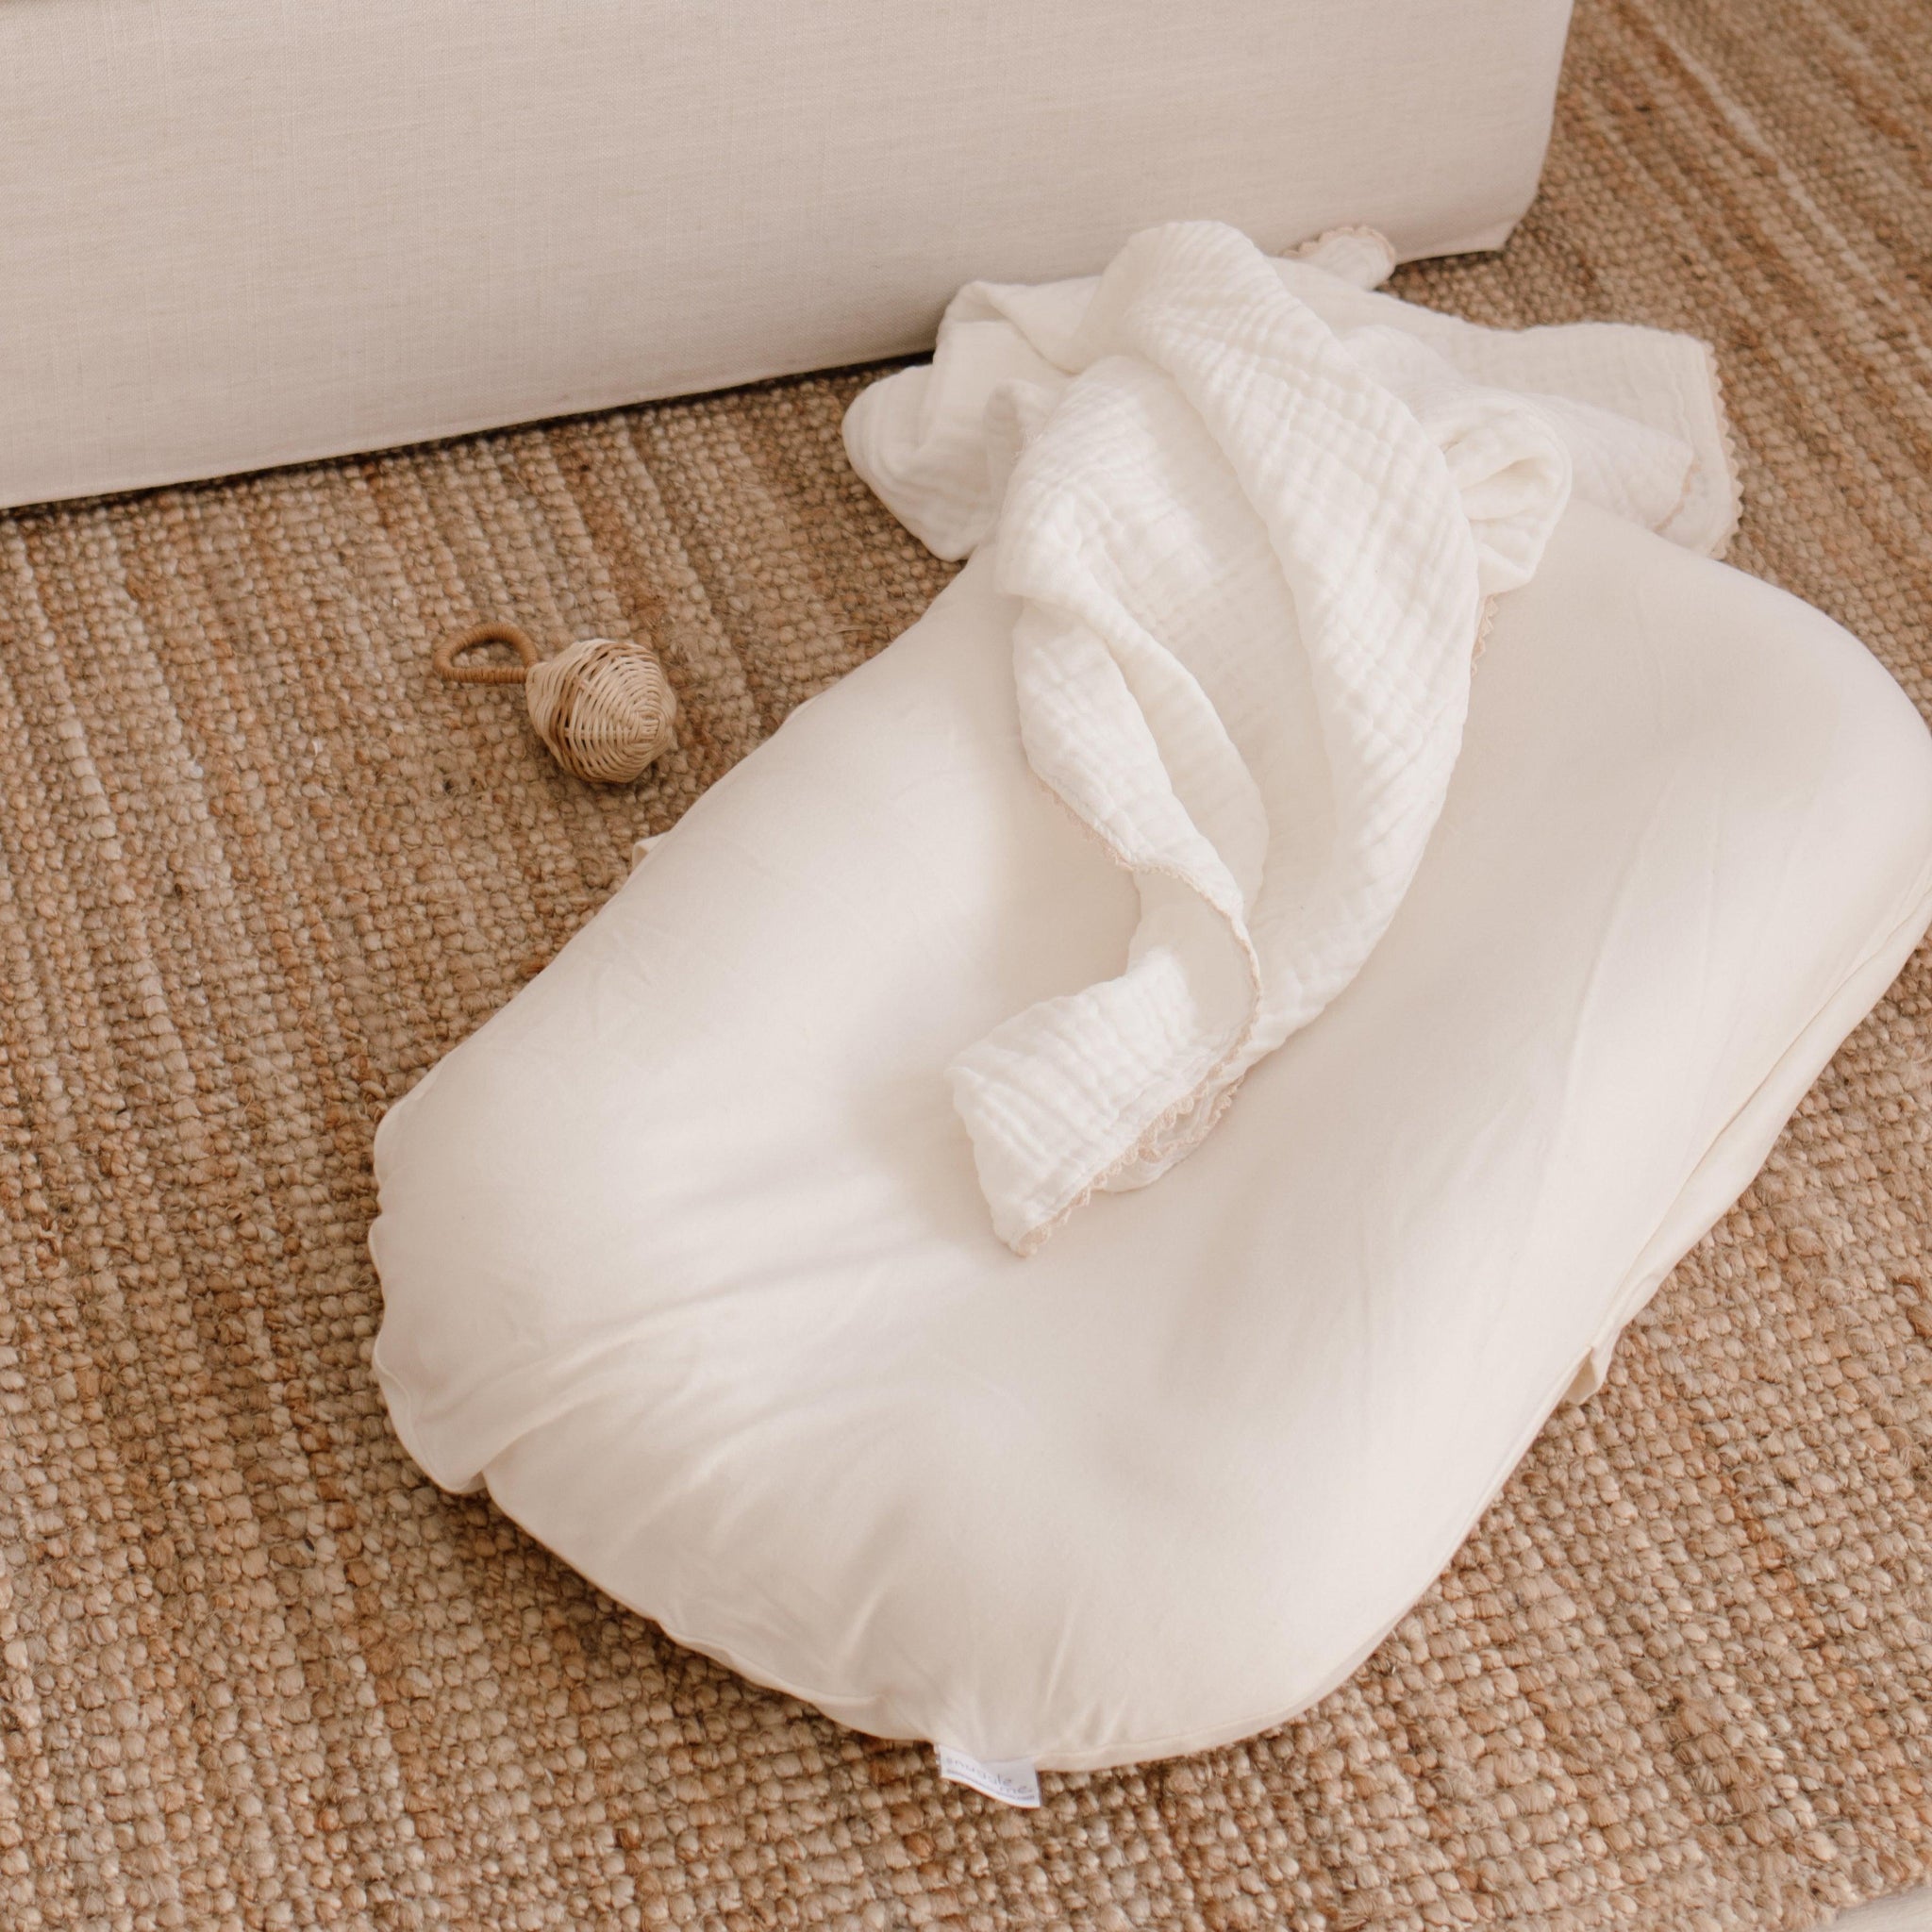 The Snuggle Me® Lounger on a woven rug with a white blanket on top.